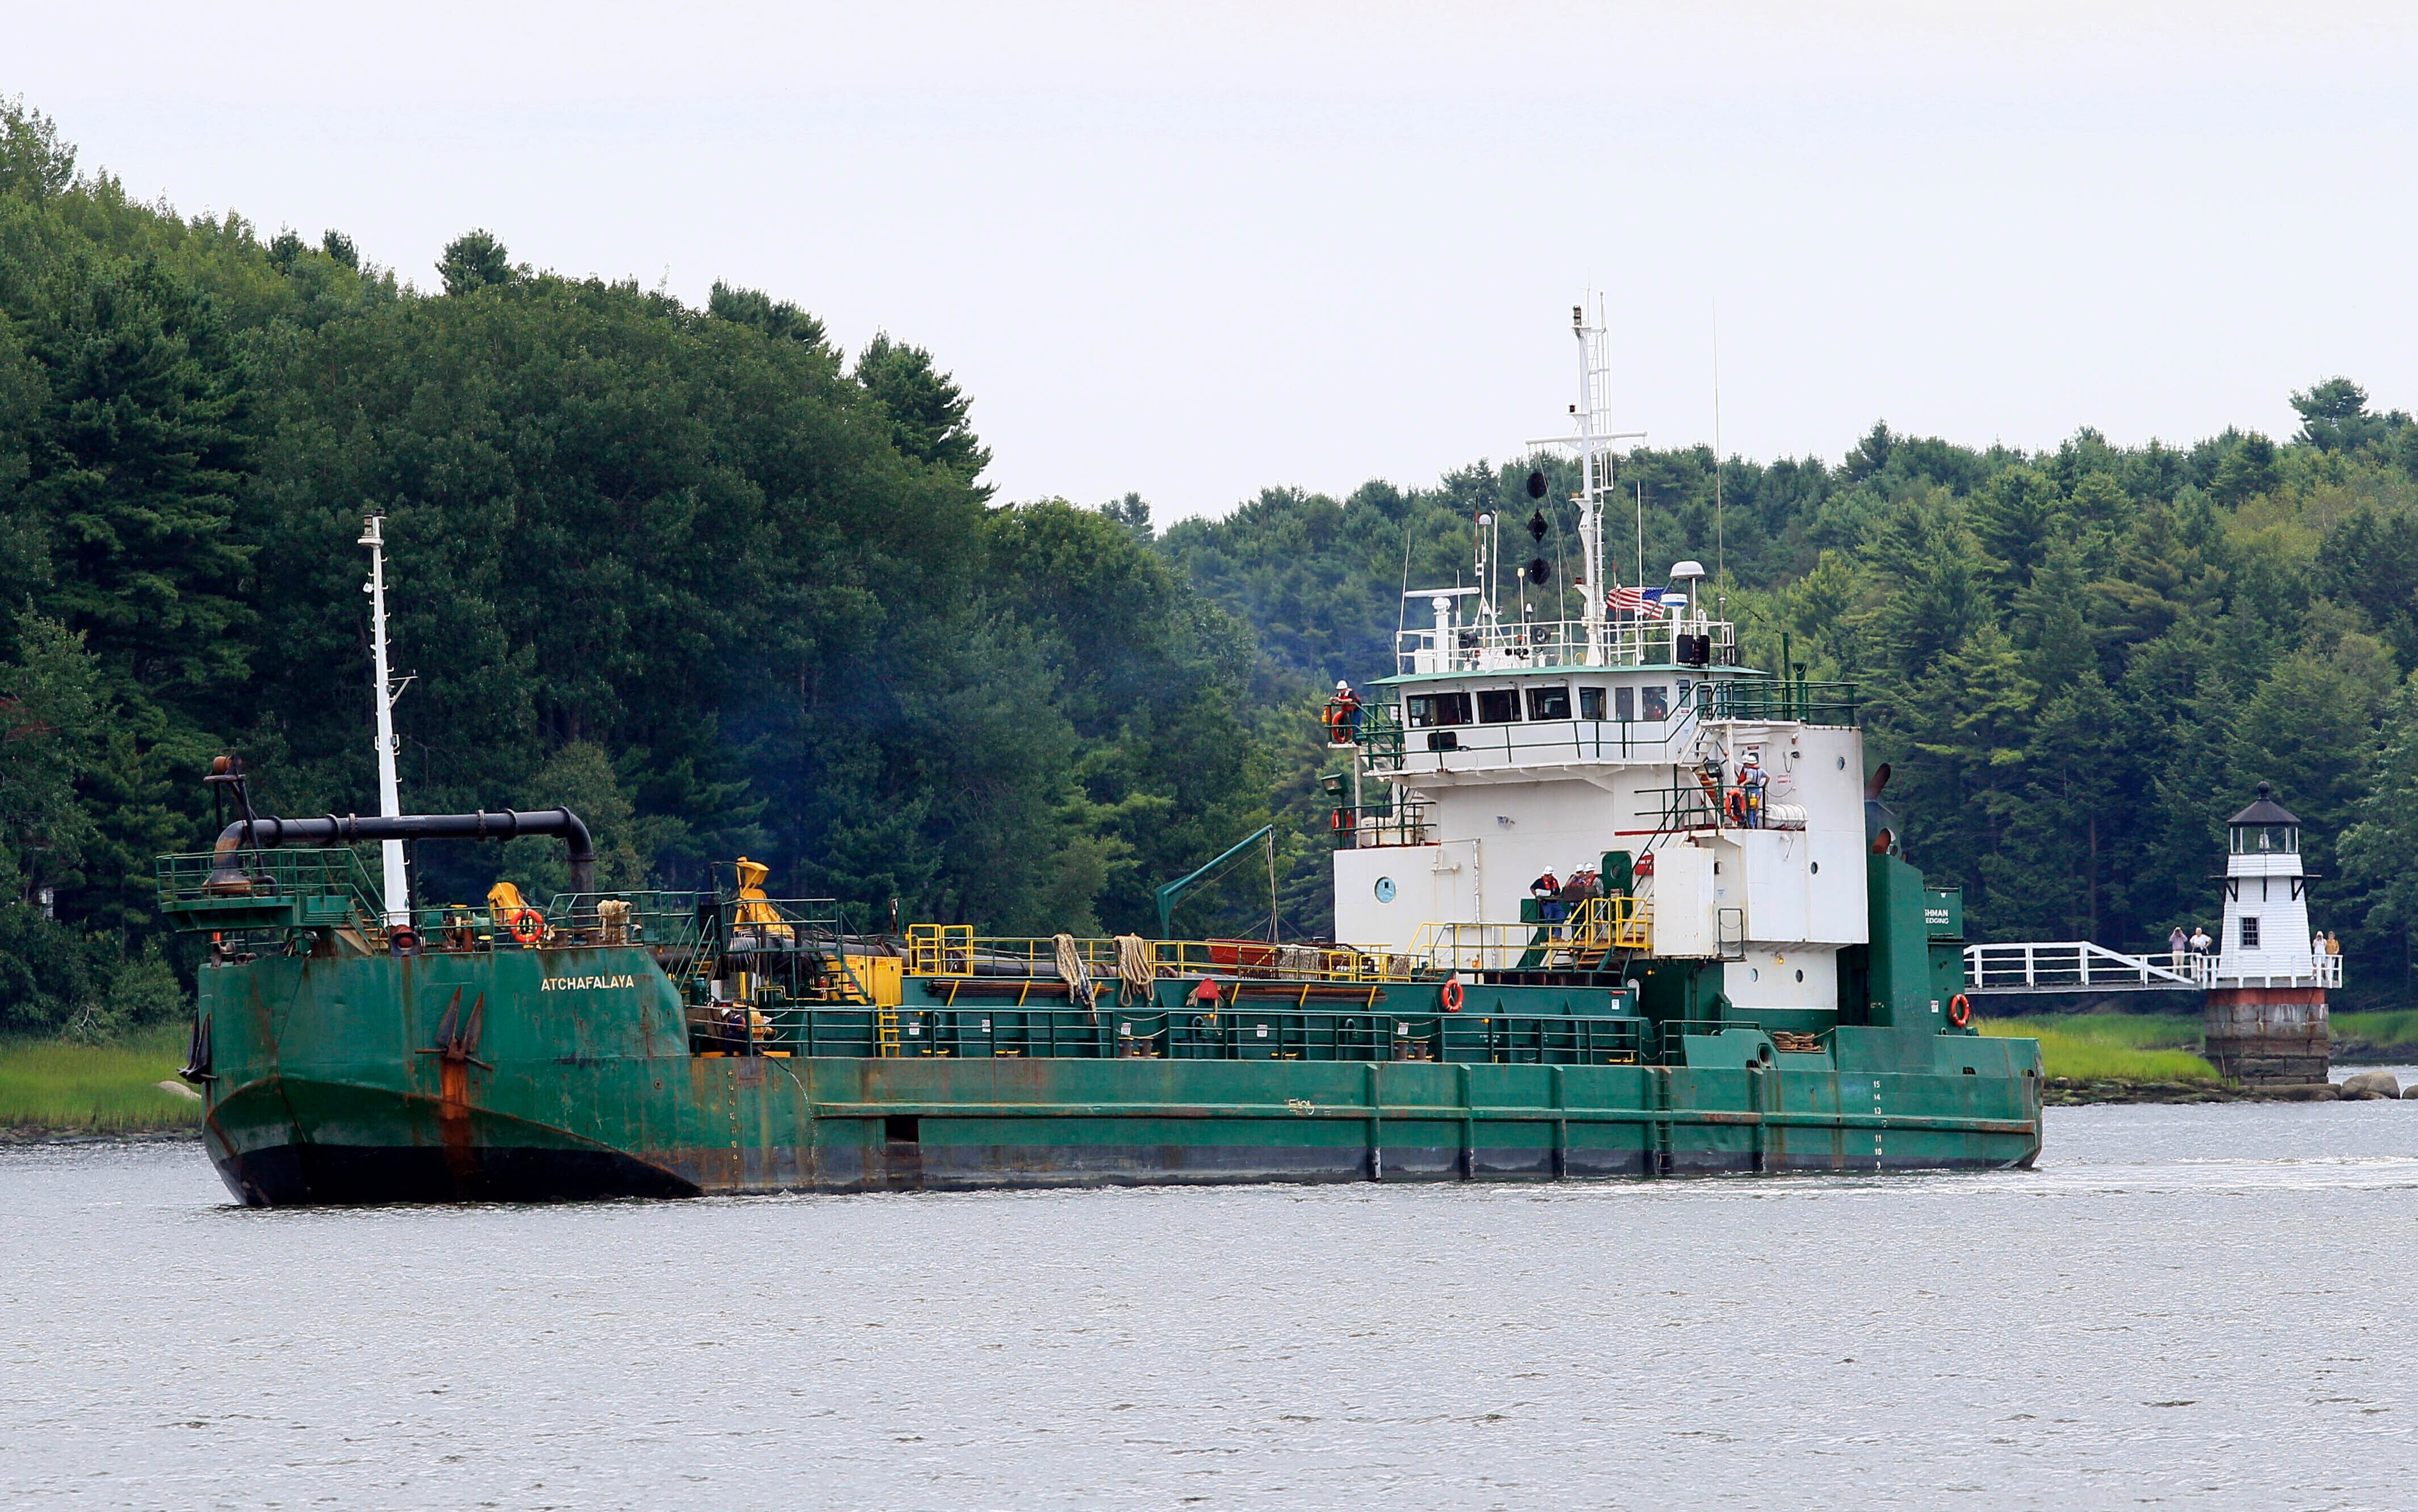 File photo: Spectators watch as a dredger works to deepen a shallow channel in the Kennebec River, upstream from the Doubling Point Lighthouse, Aug. 5, 2011, in Arrowsic, Maine